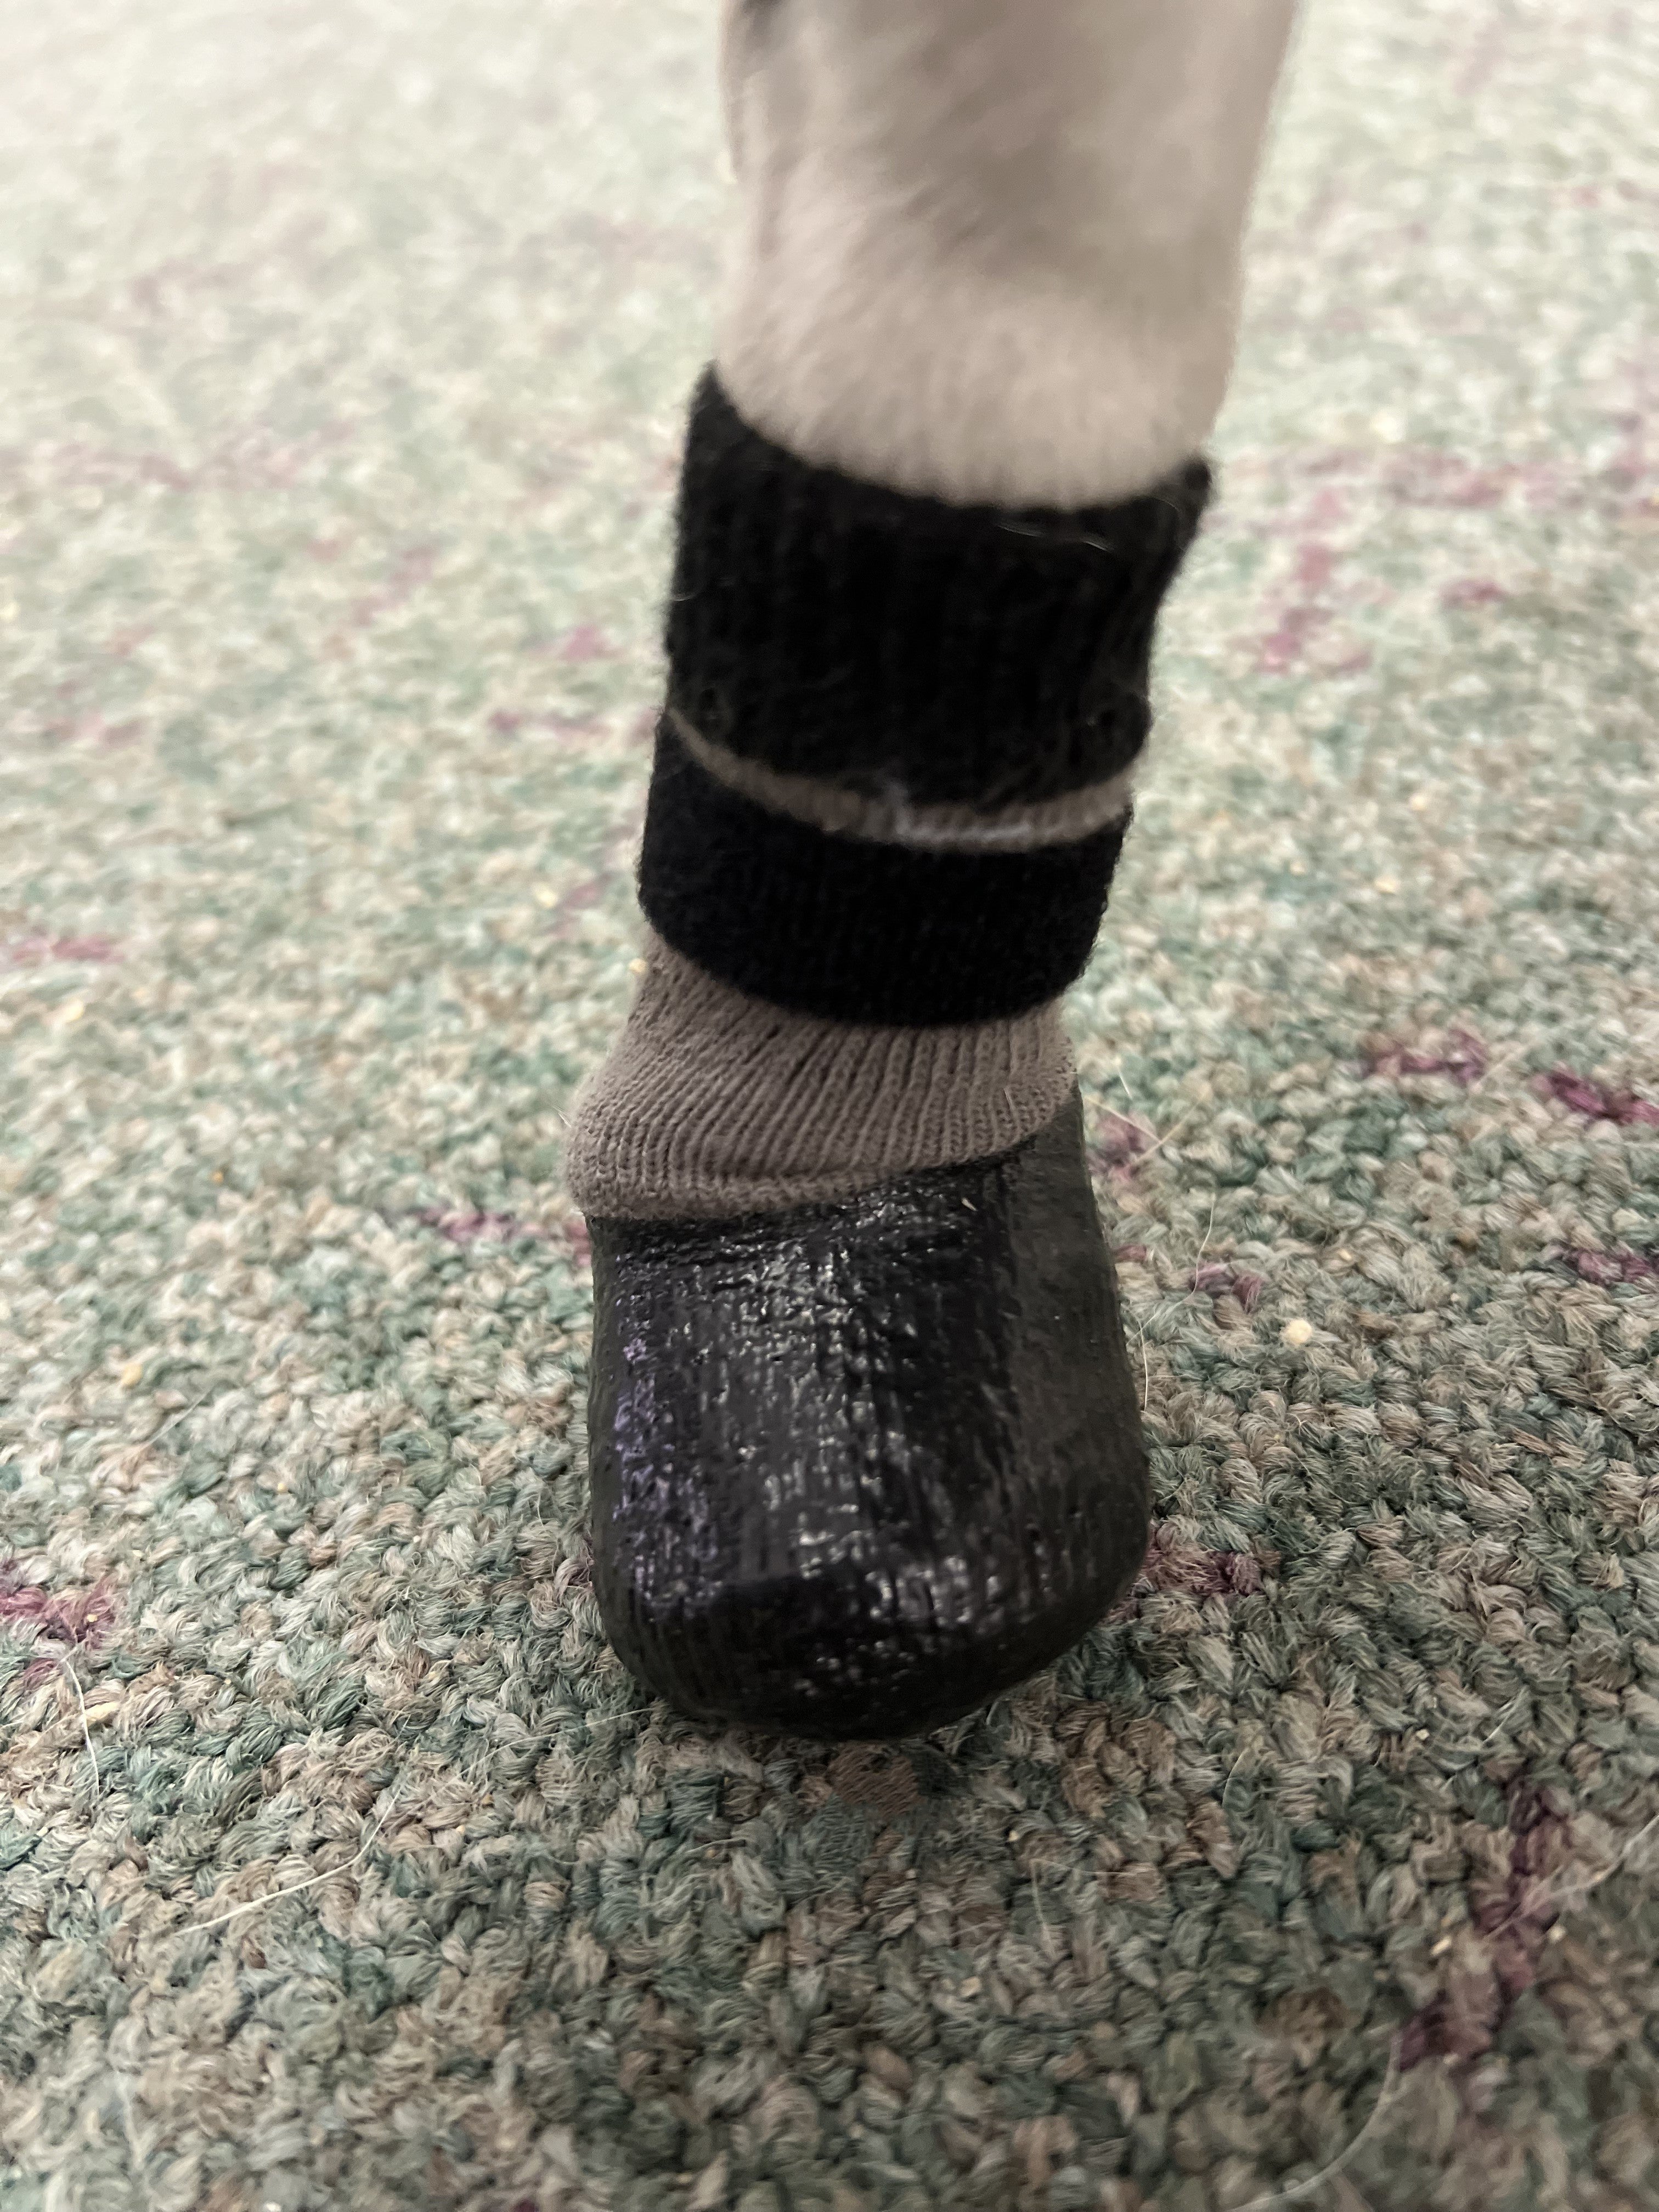 How do I keep my dogs socks from falling off?